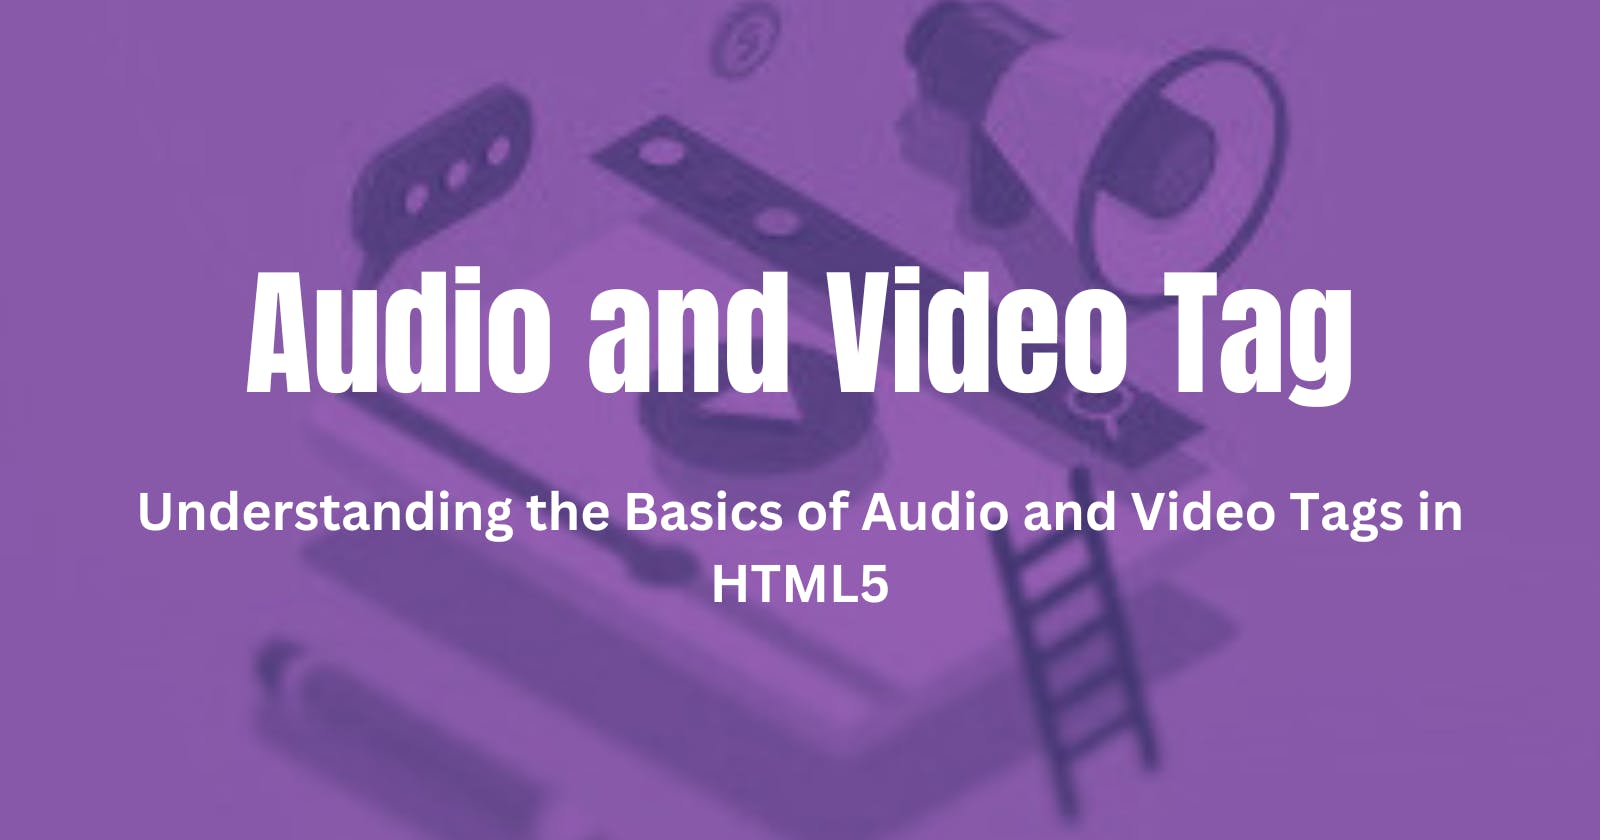 Demystifying the Audio and Video Tags: A Beginner's Guide